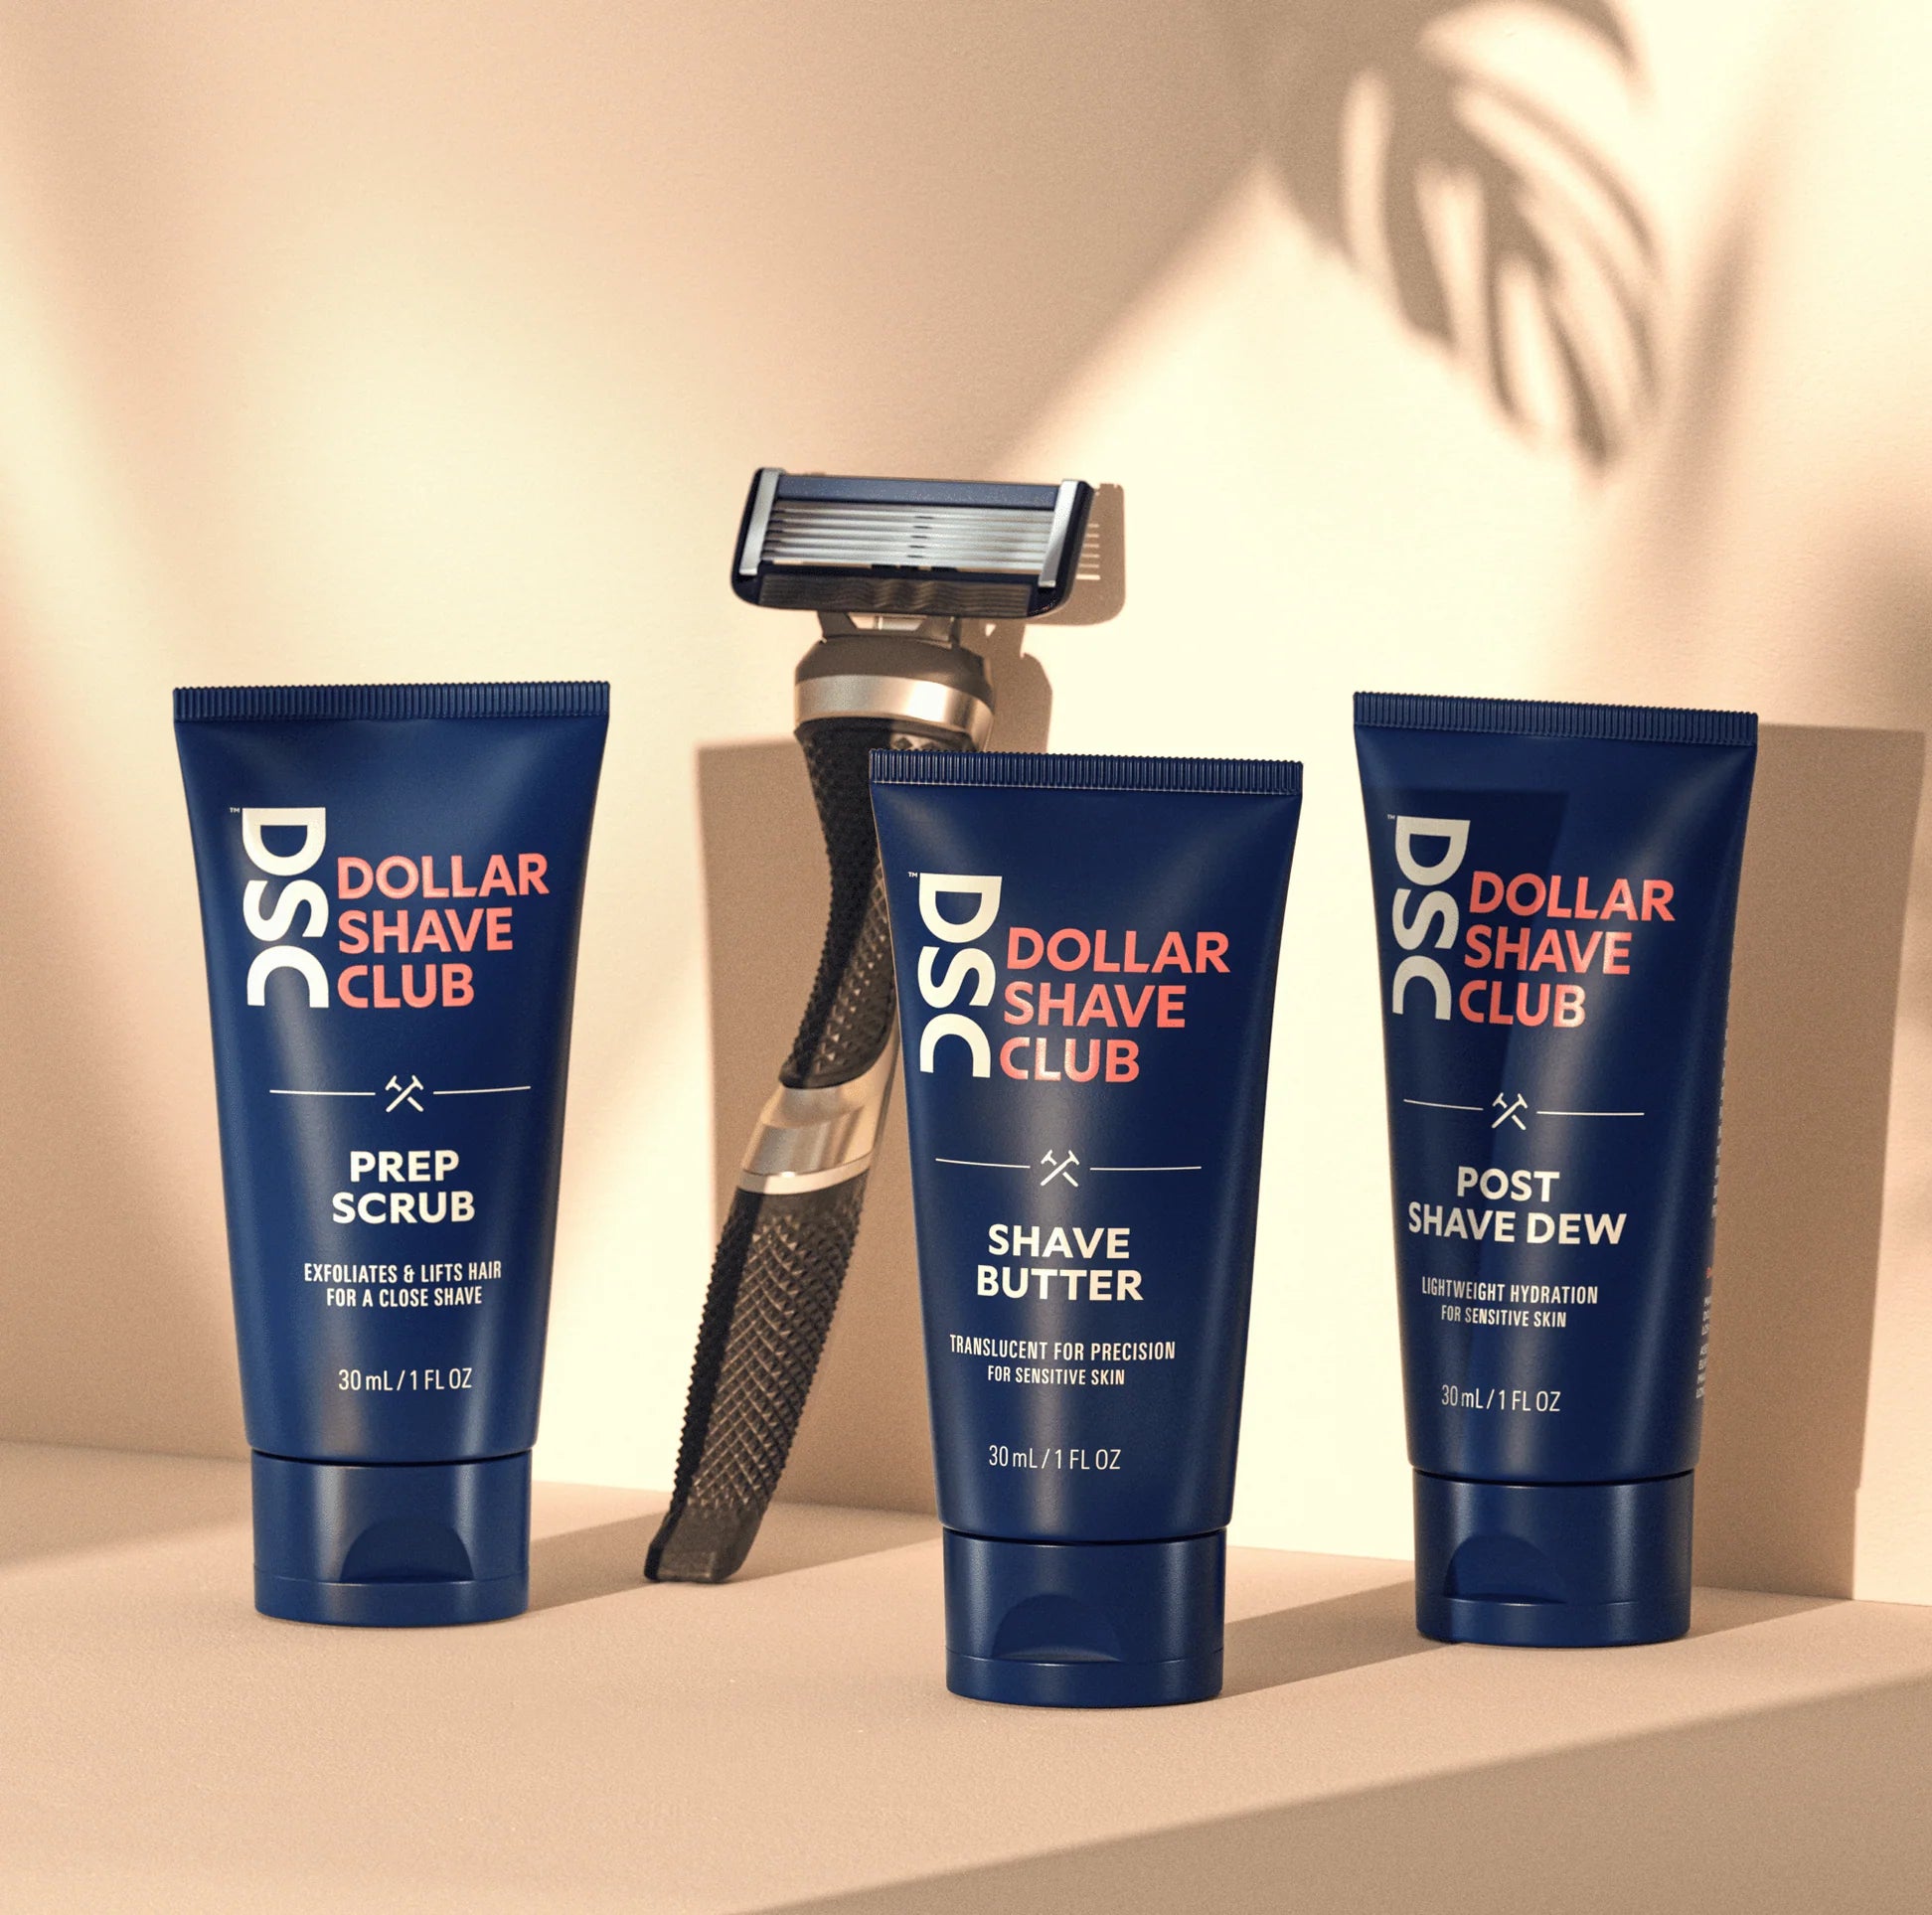 Dollar Shave Club Ultimate Shave Trial Kit Image Featuring All Products on Tan Backdrop. 